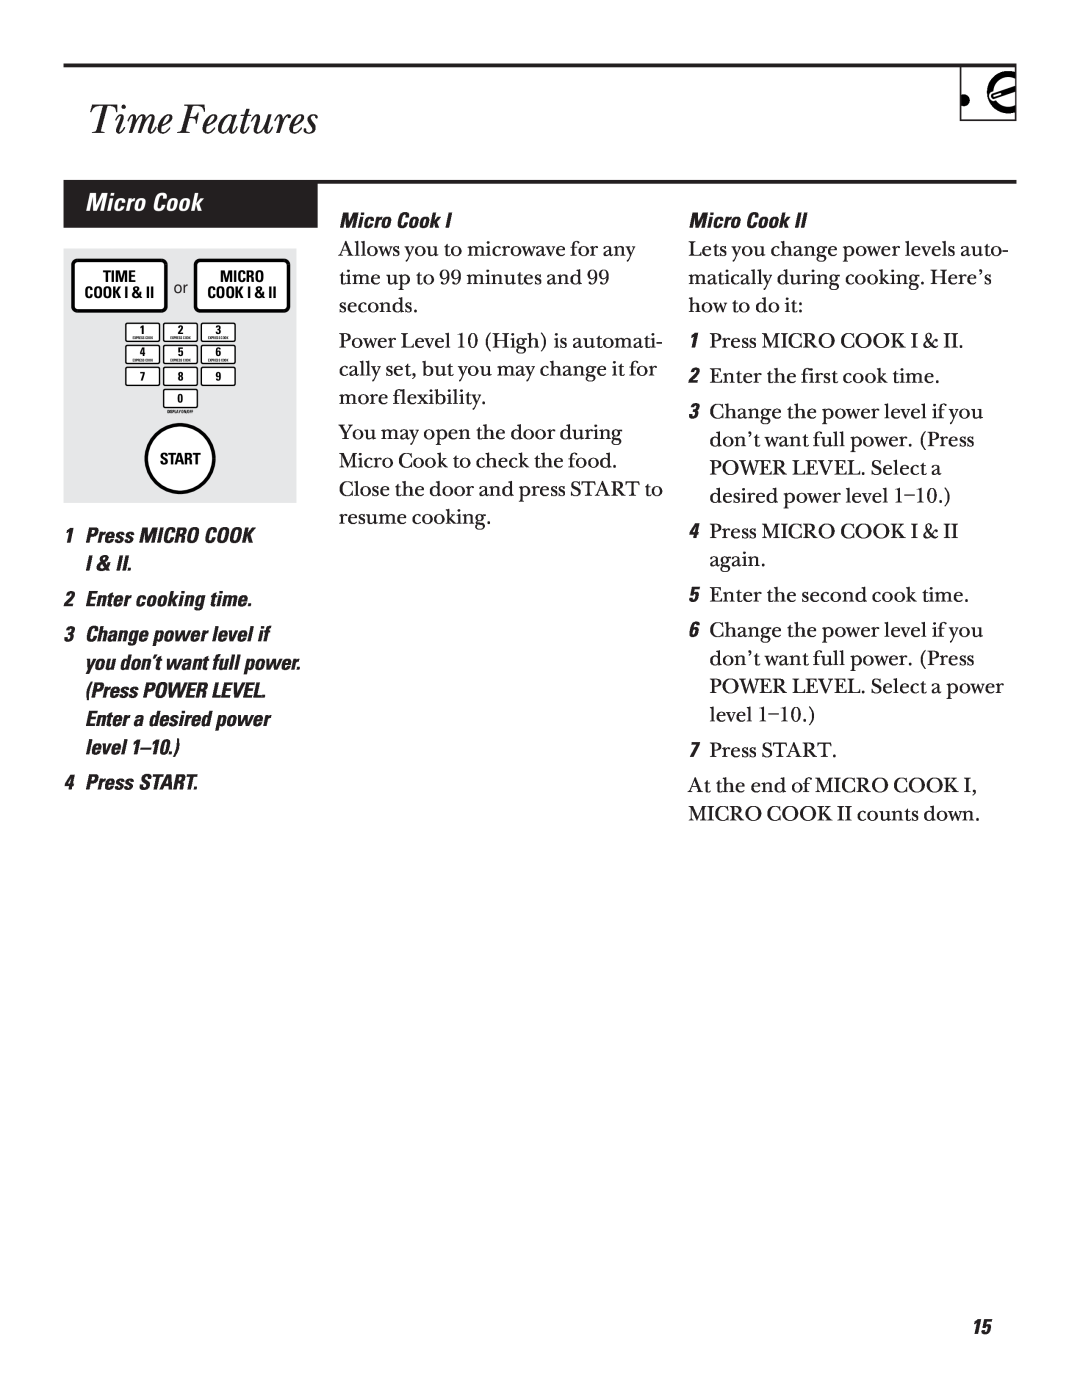 GE JVM1320 warranty Time Features, Micro Cook 